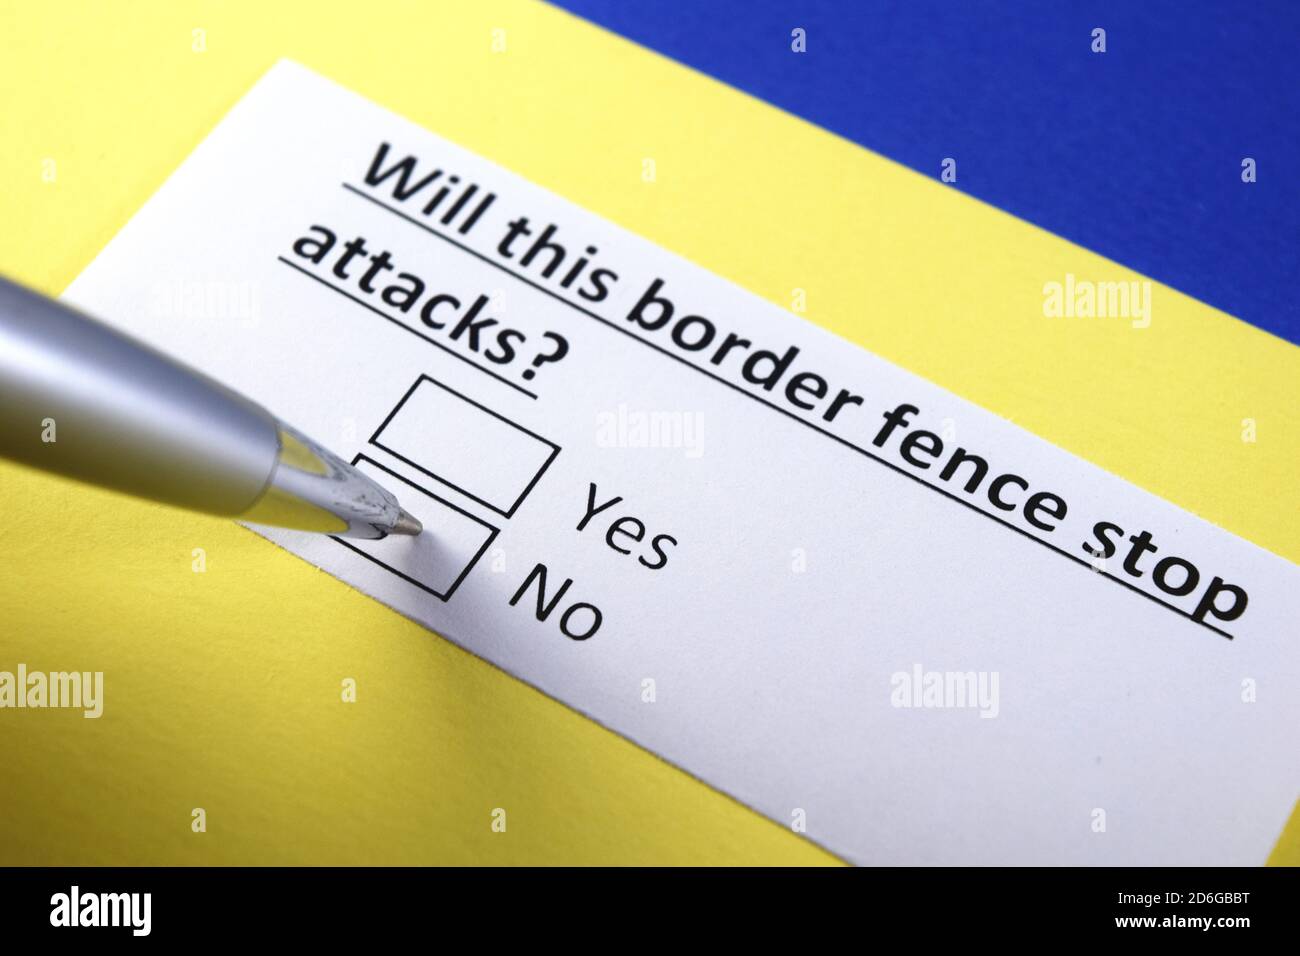 Will this border fence stop attacks? Yes or no? Stock Photo